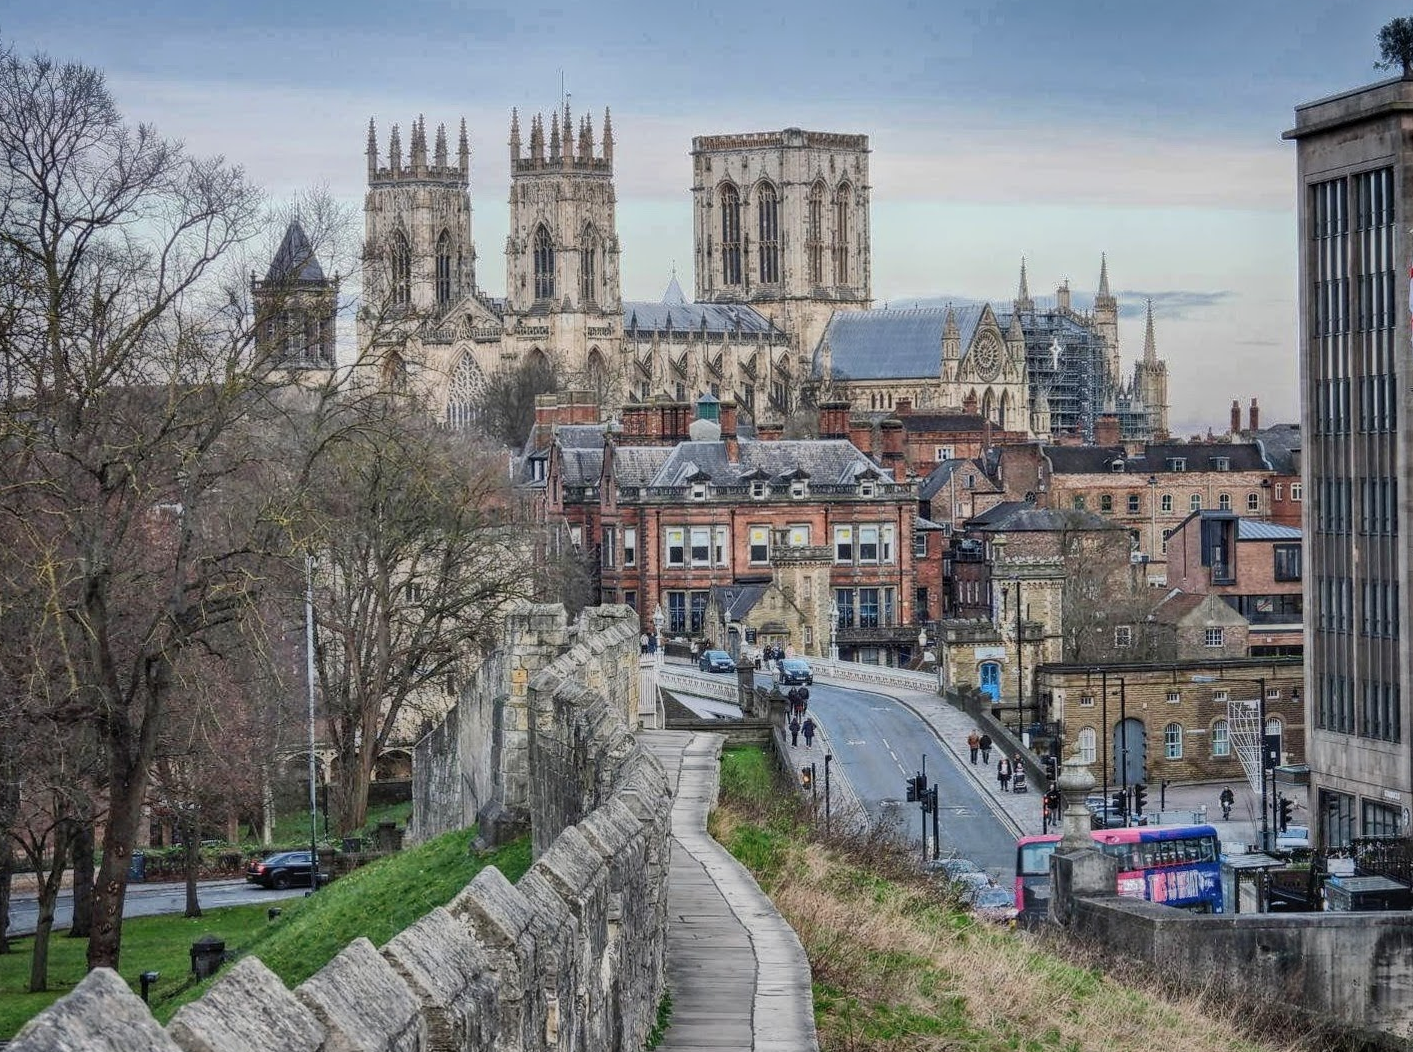 Classic photo of York Minster from the walls